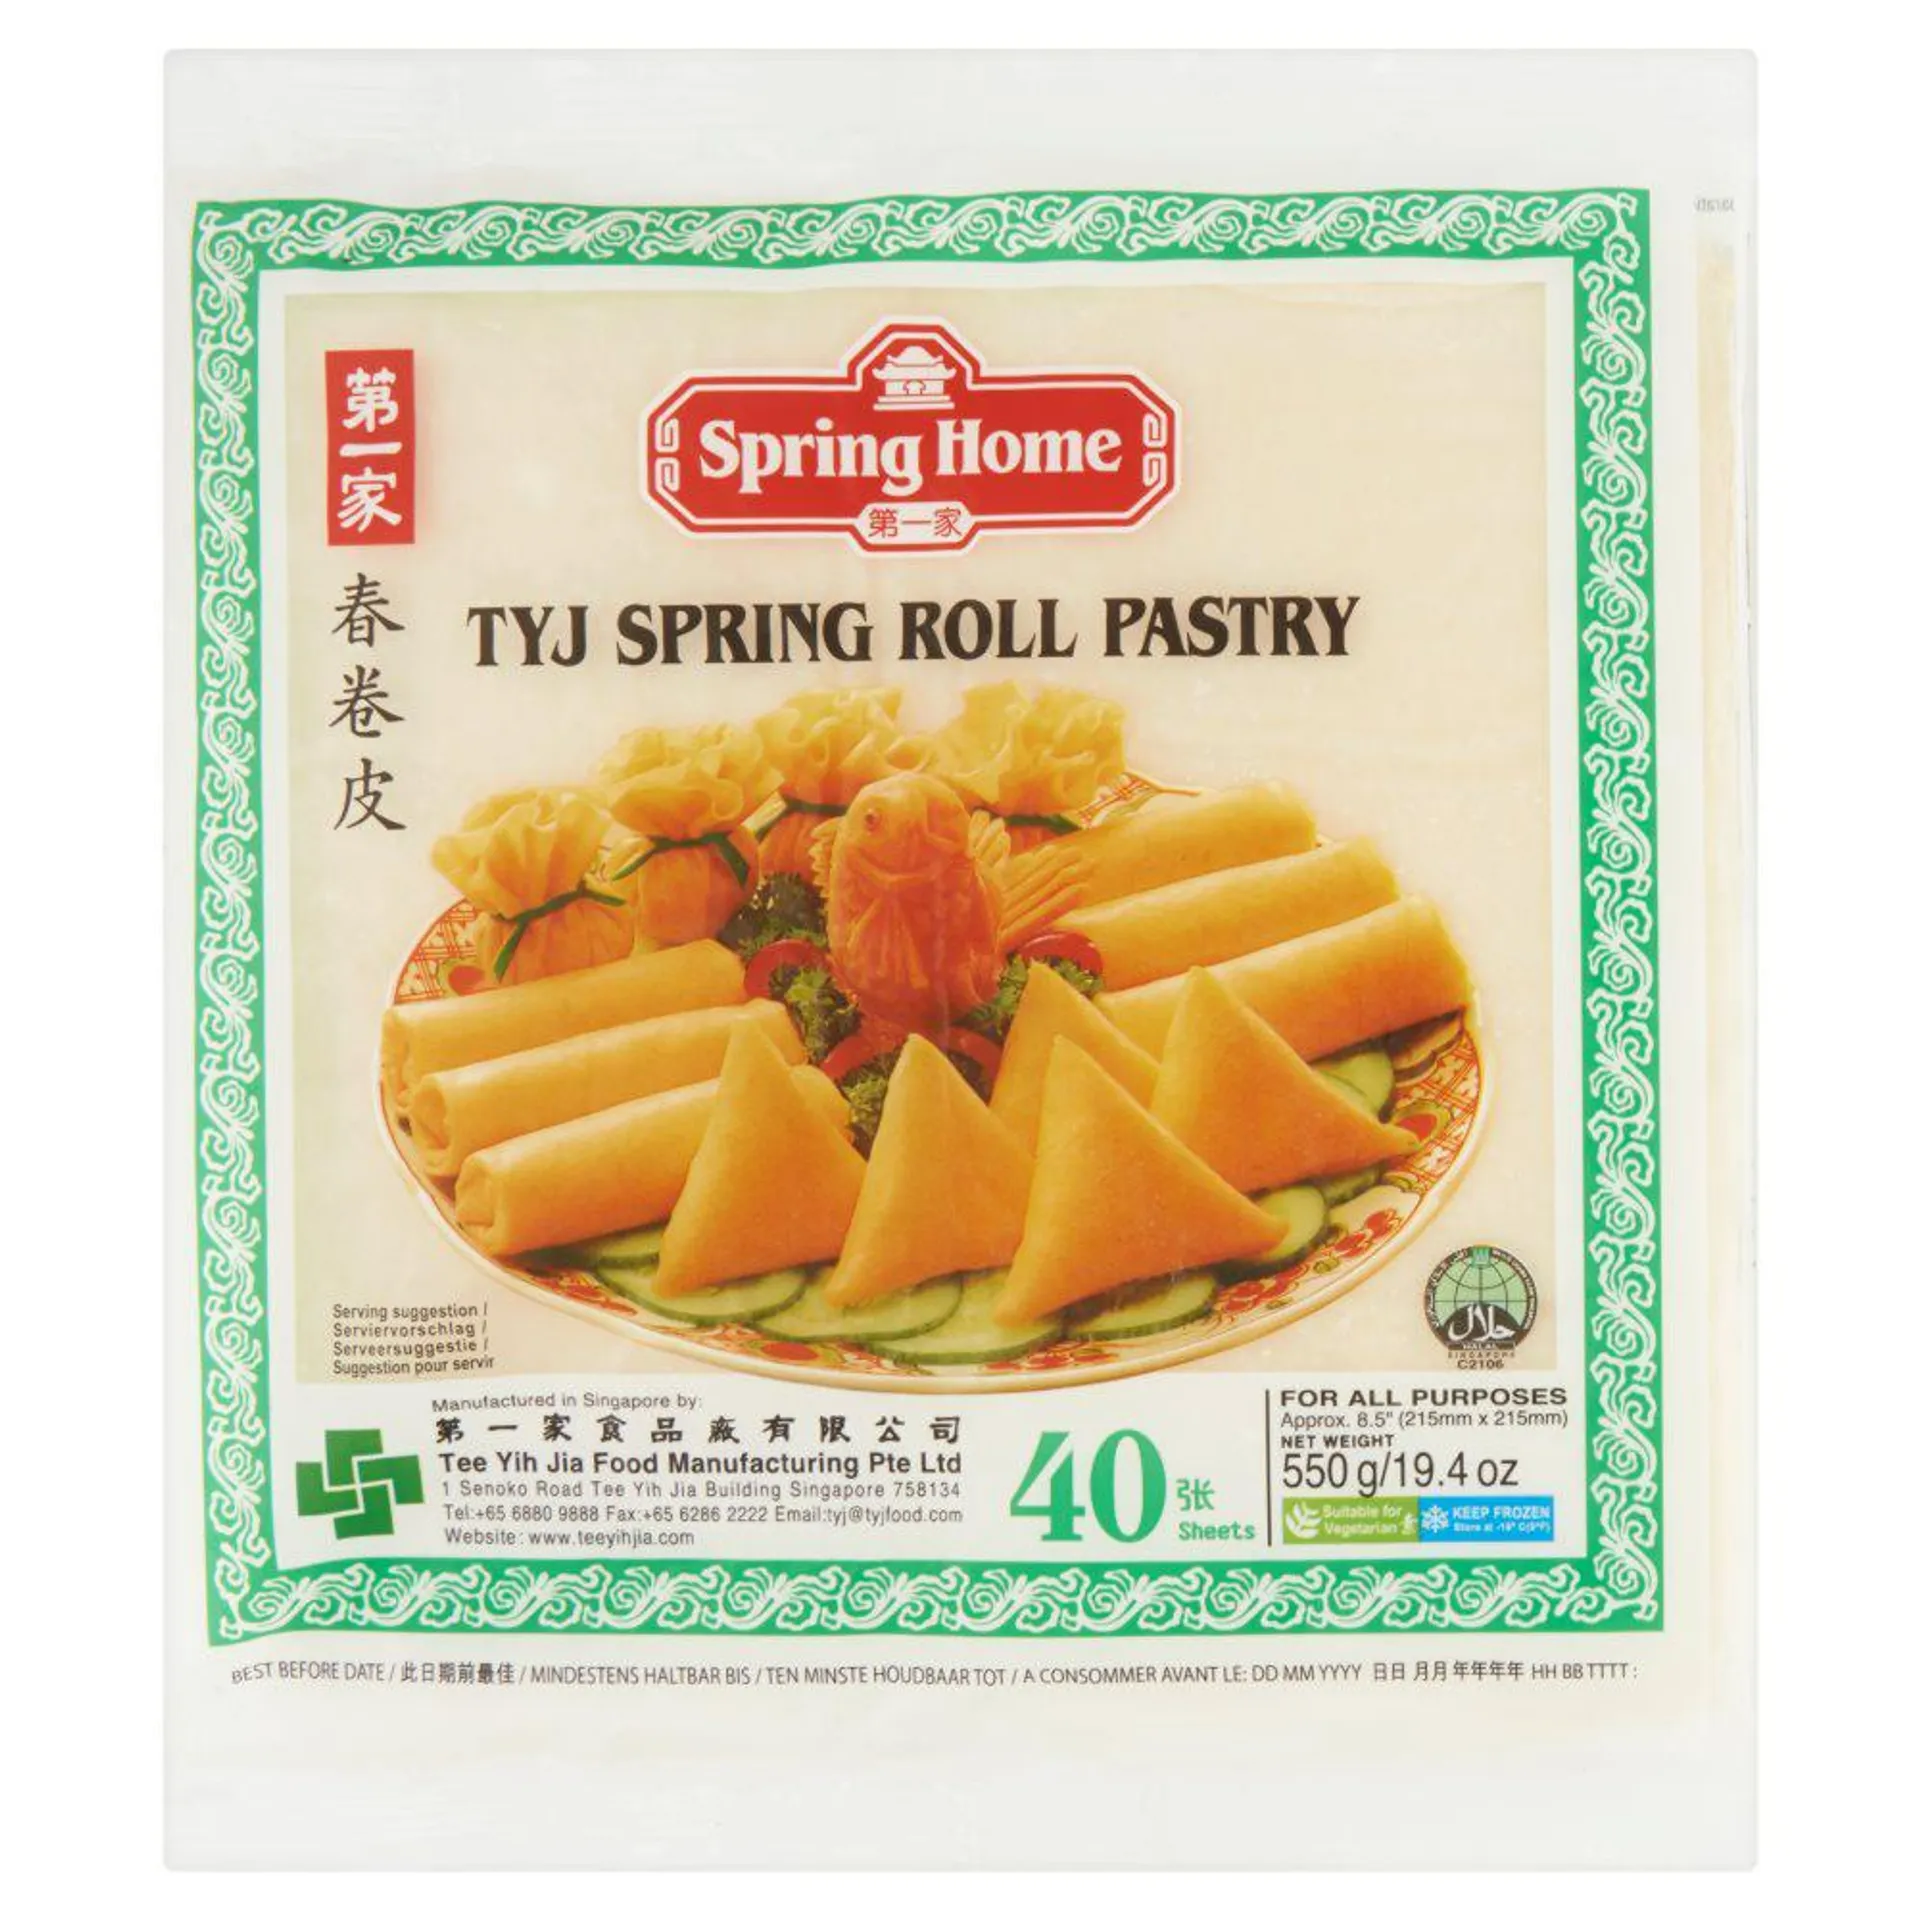 Spring Home TYJ Spring Roll Pastry 40 Blad 500 g